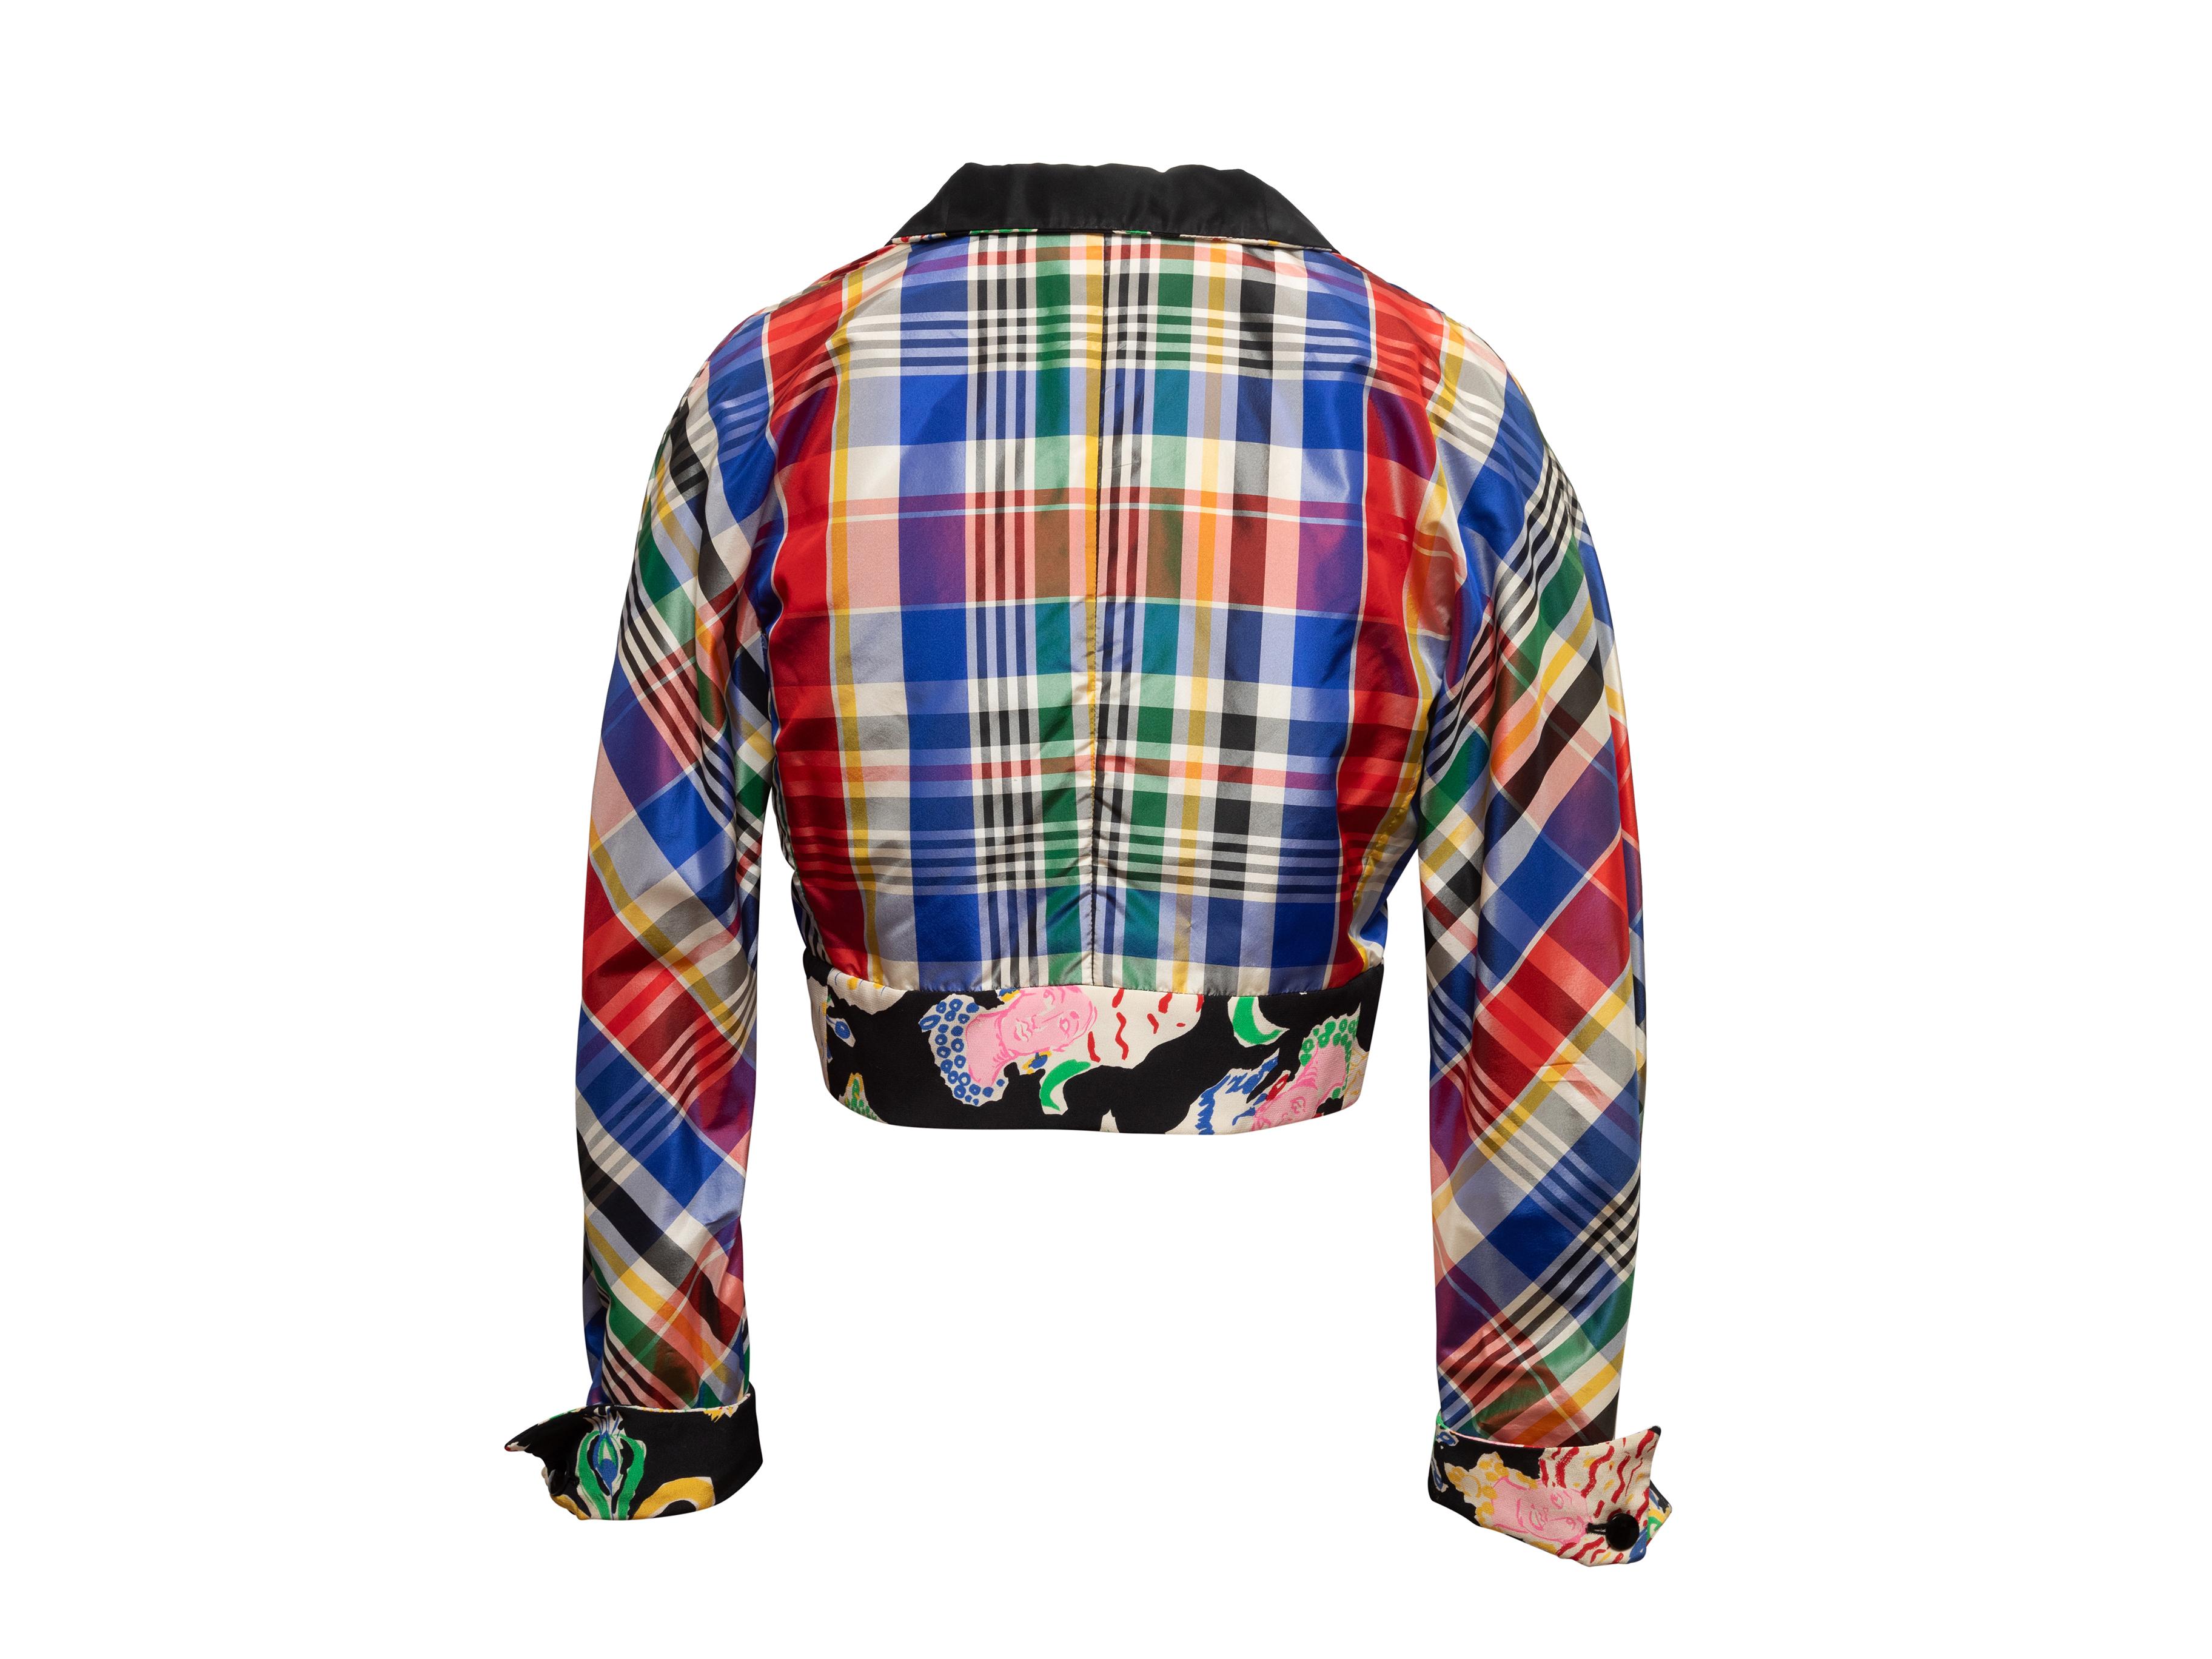 Emanuel Ungaro Multicolor  Parallele Plaid Jacket In Good Condition For Sale In New York, NY